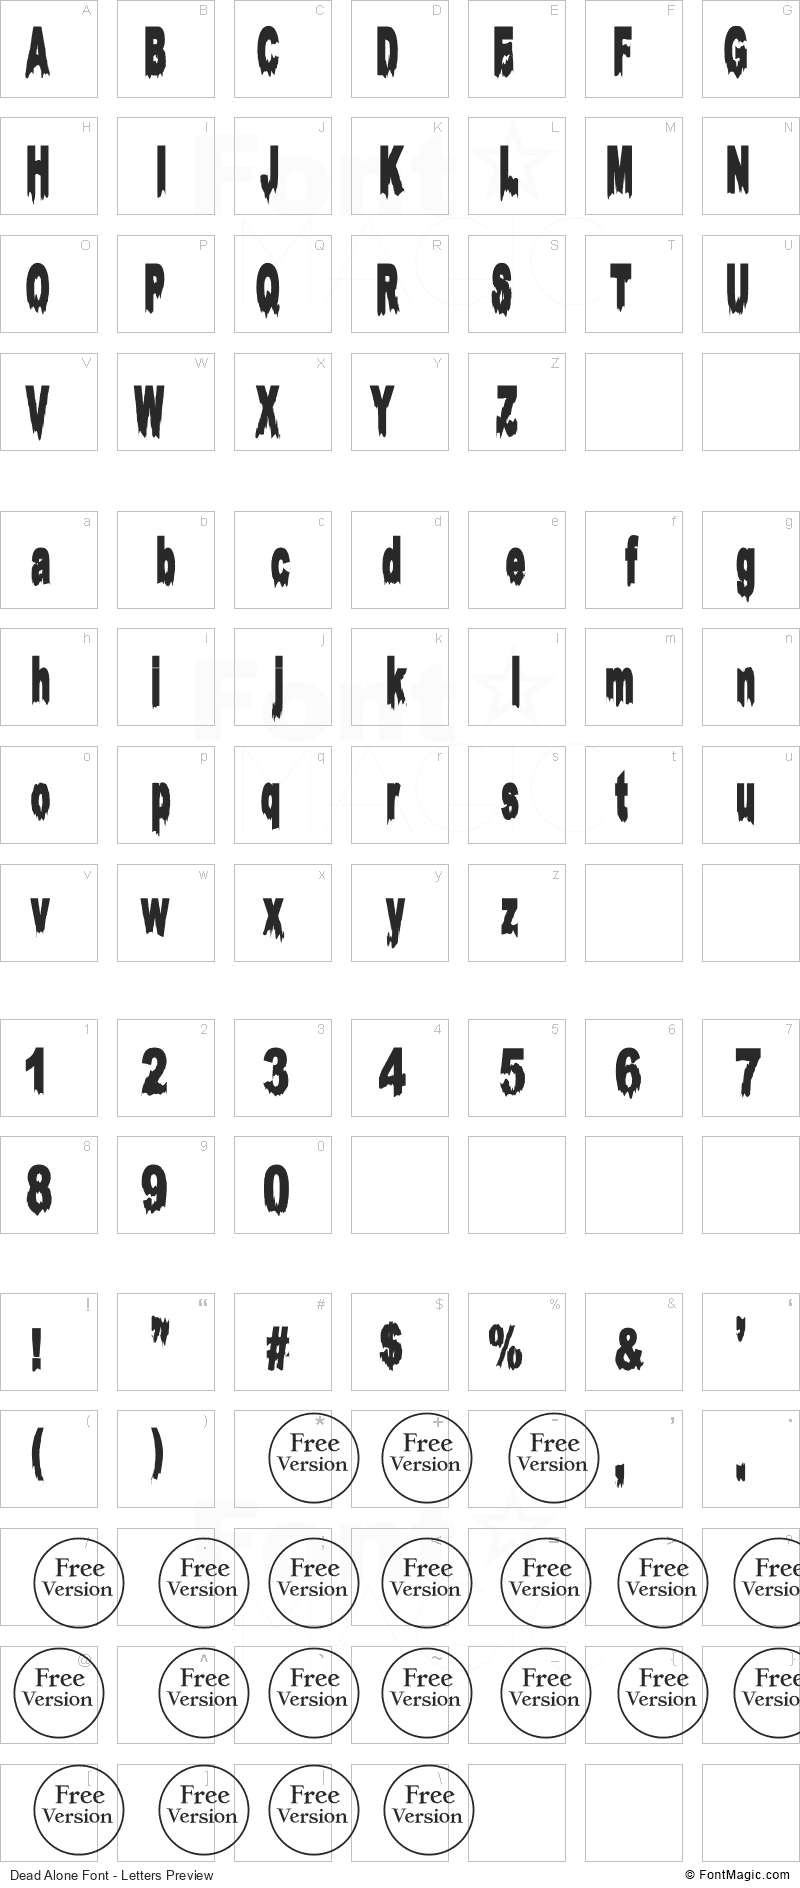 Dead Alone Font - All Latters Preview Chart